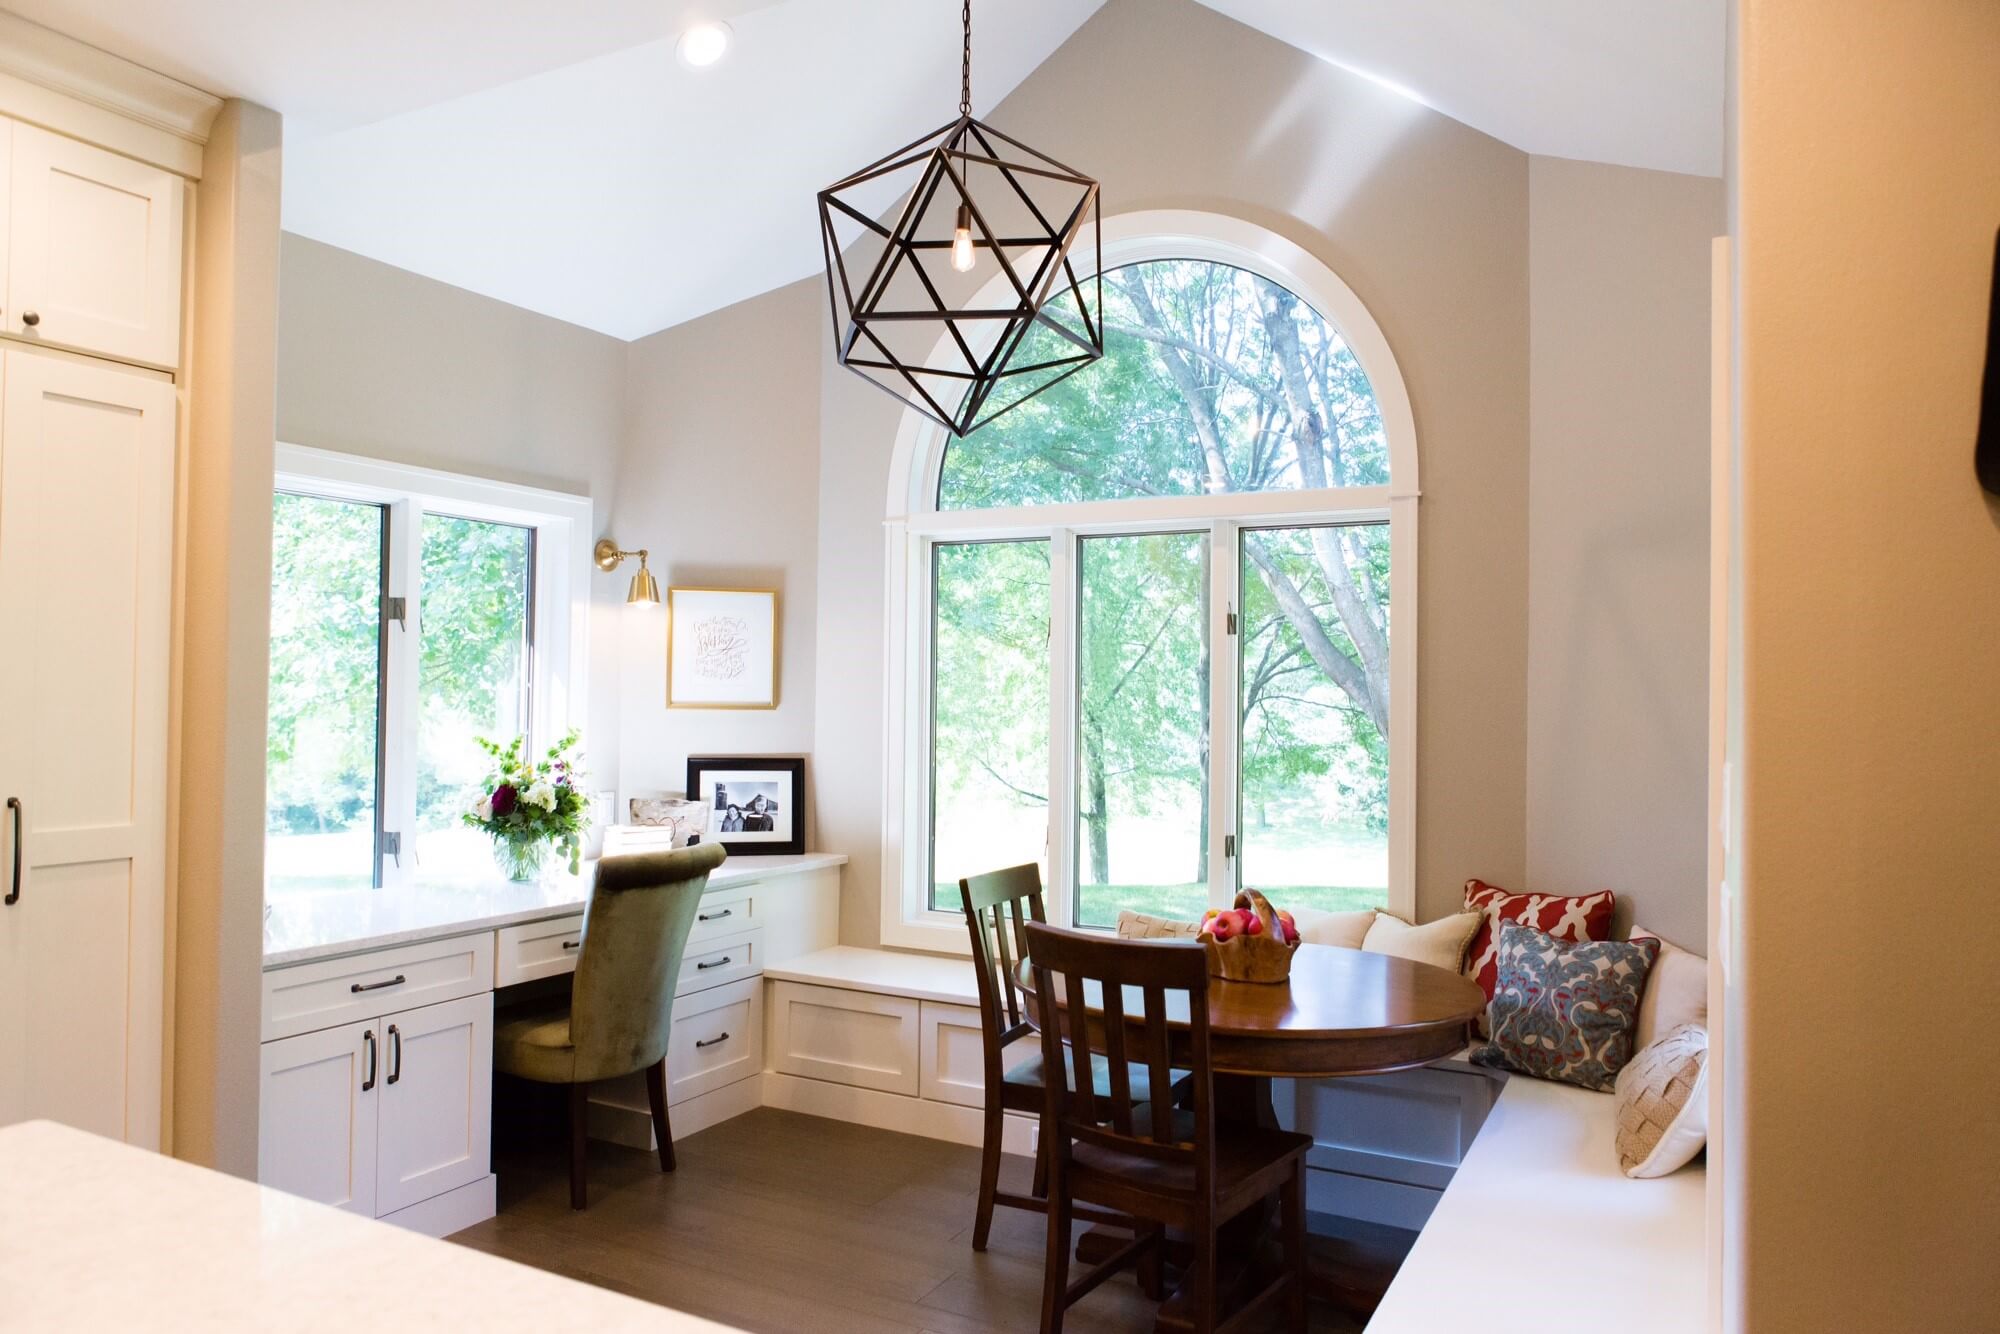 A kitchen breakfast nook and home office combination with one large scale and artisitc light fixture.